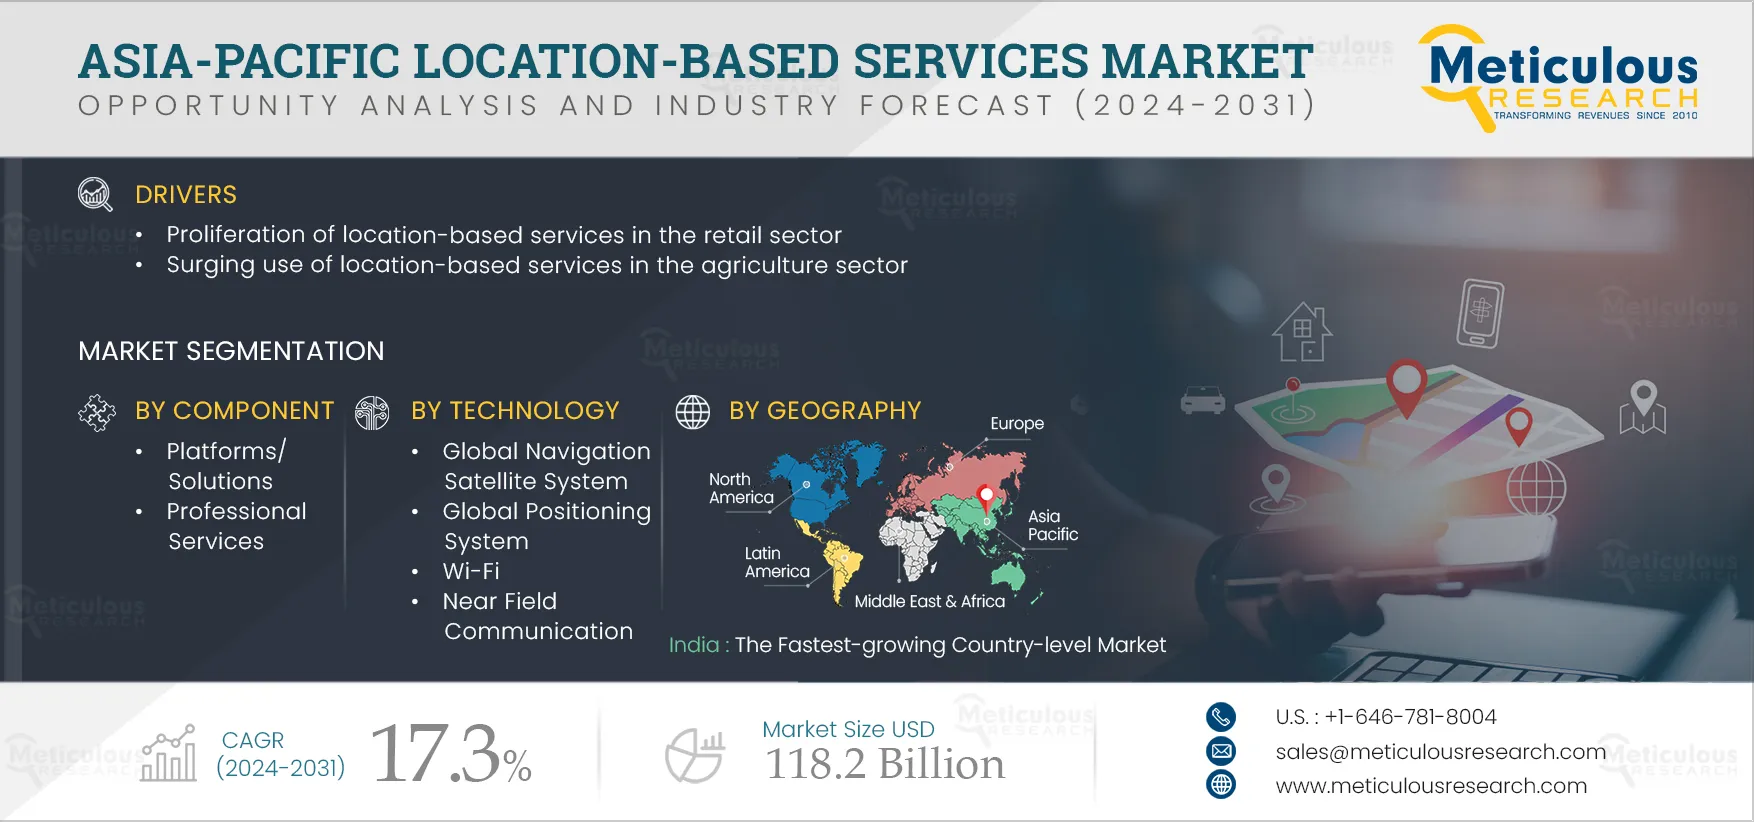 Asia-Pacific Location-based Services Market 